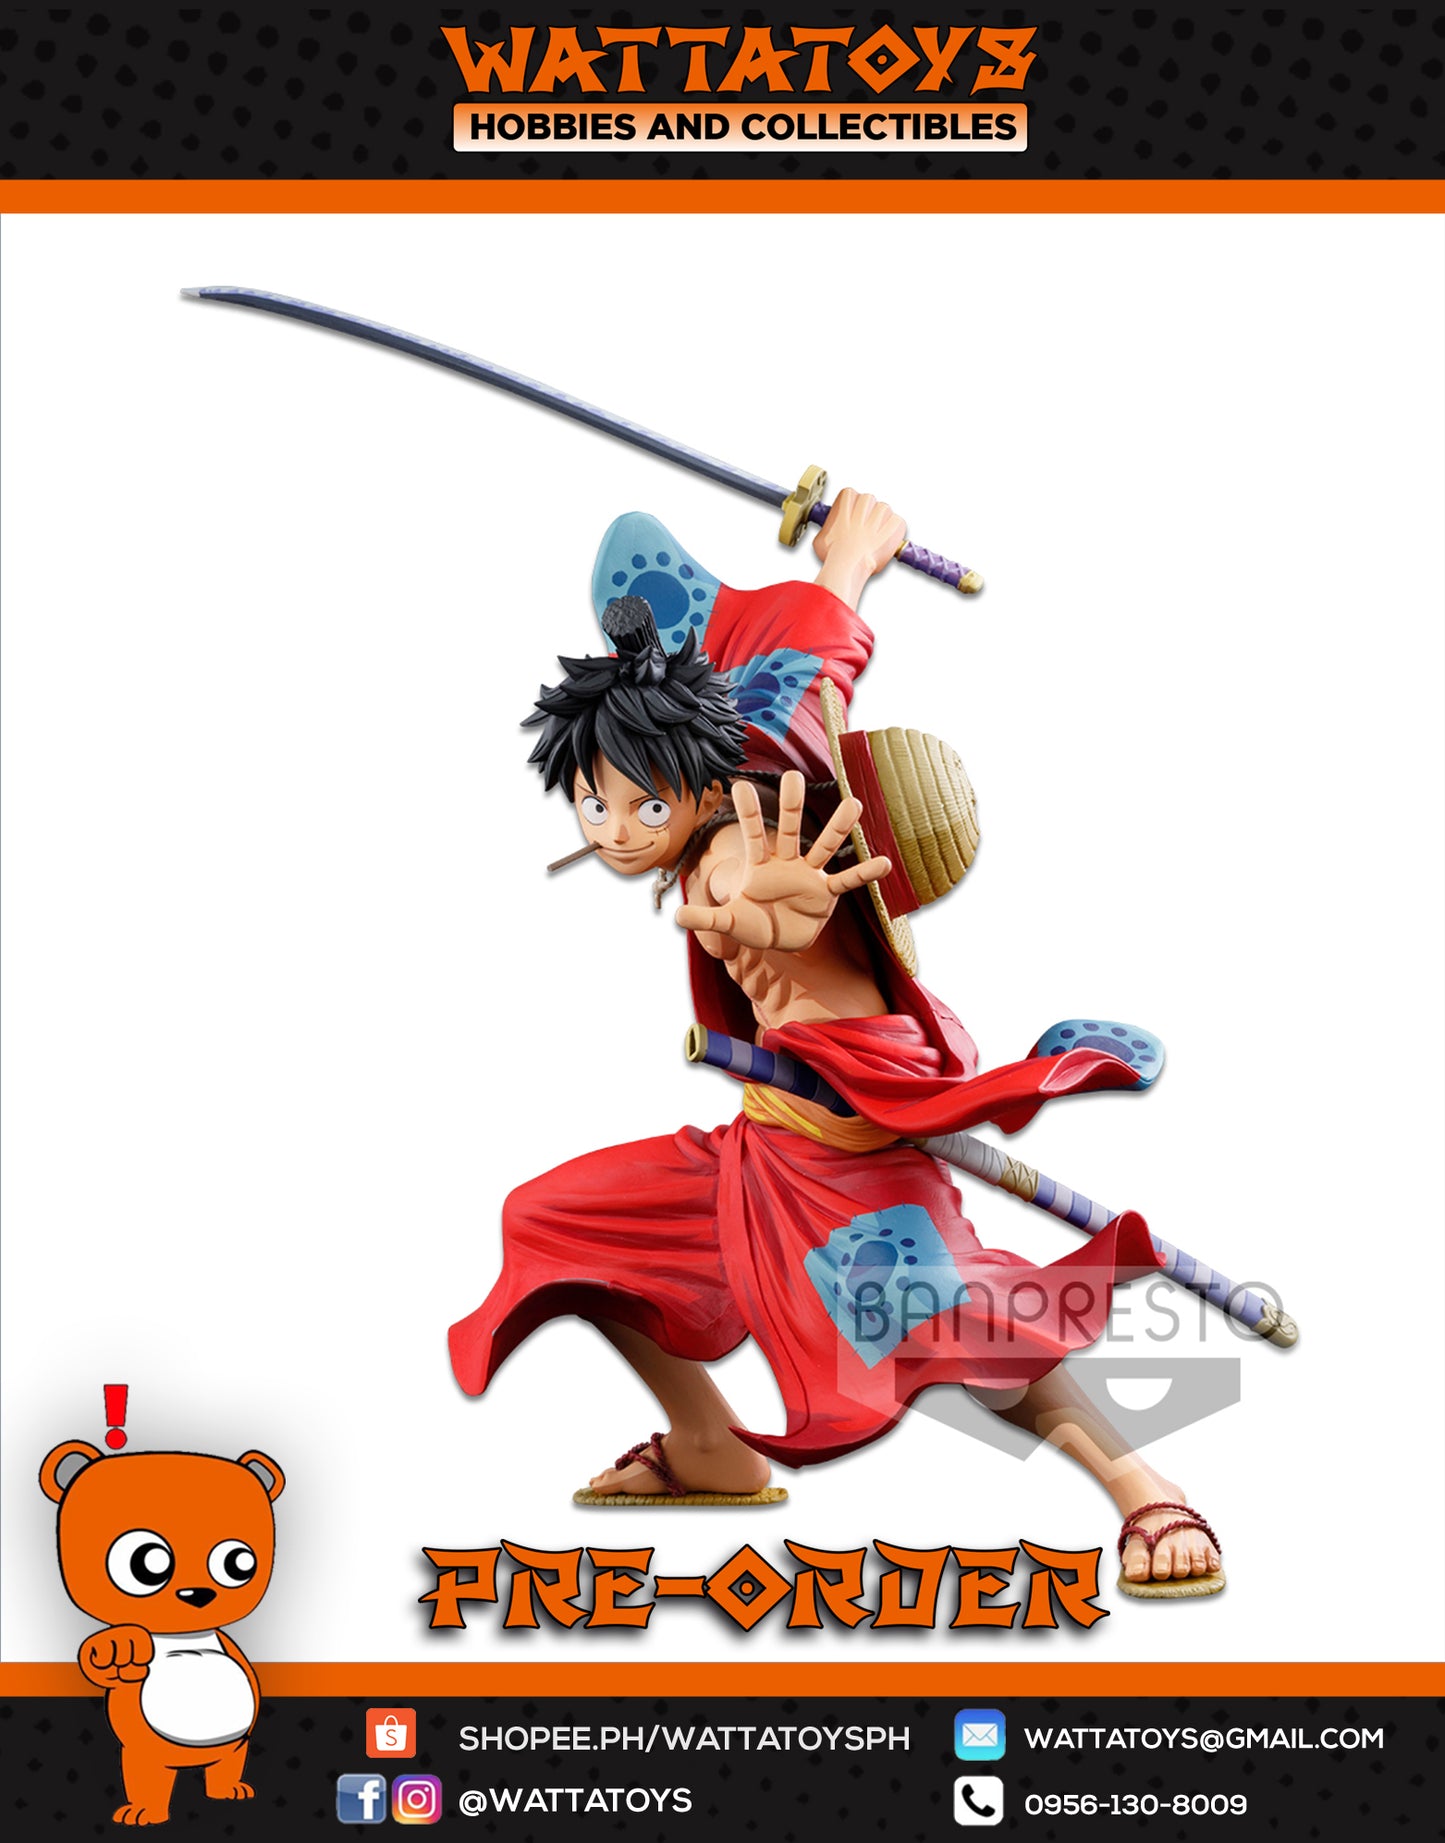 PRE ORDER One Piece BWFC3 Super Master Stars Piece -The Monkey D. Luffy Two Dimensions